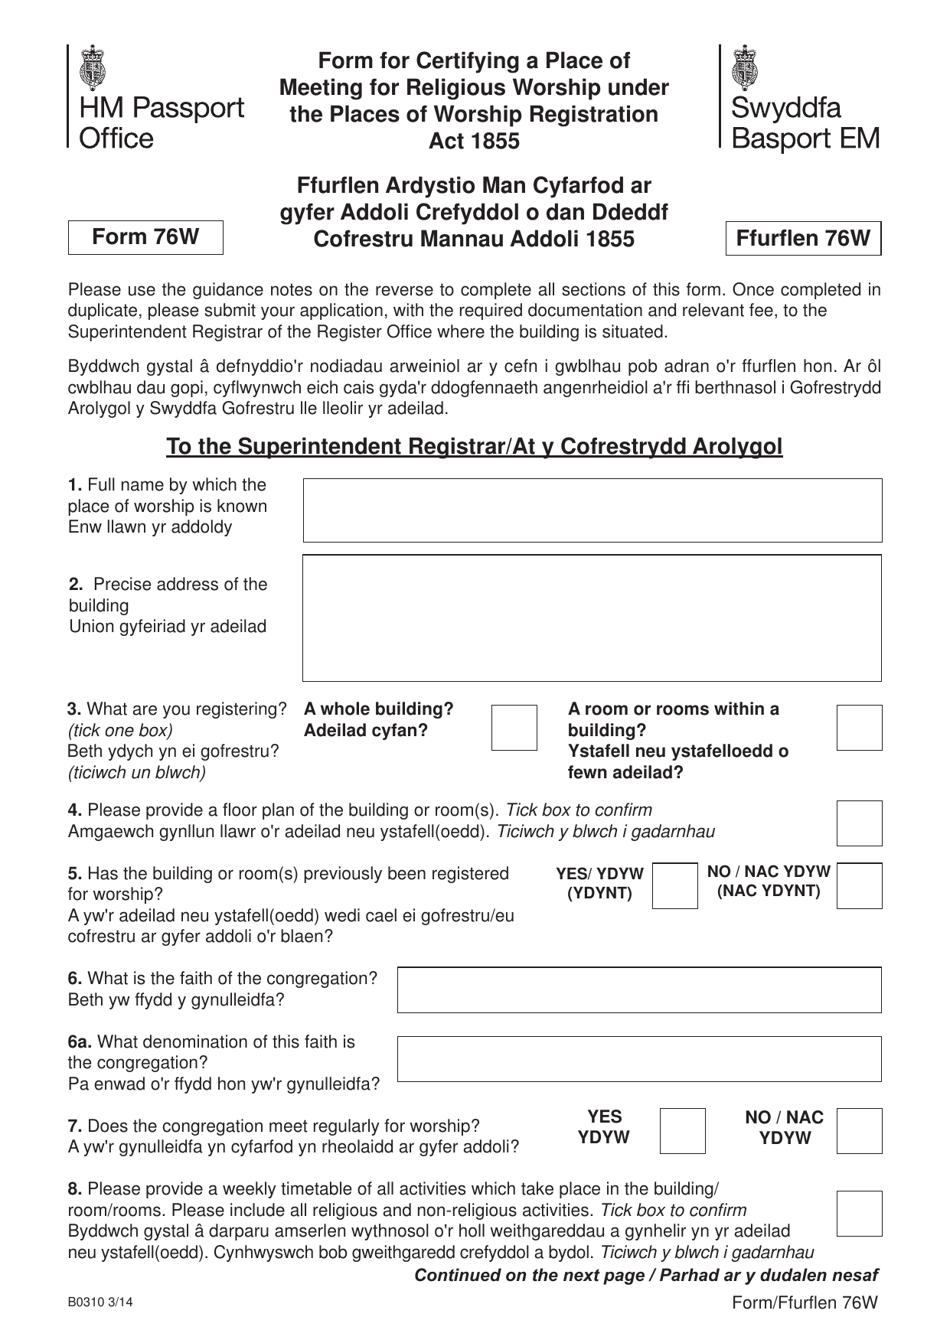 Form 76W Form for Certifying a Place of Meeting for Religious Worship Under the Places of Worship Registration Act 1855 - United Kingdom (English/Welsh), Page 1